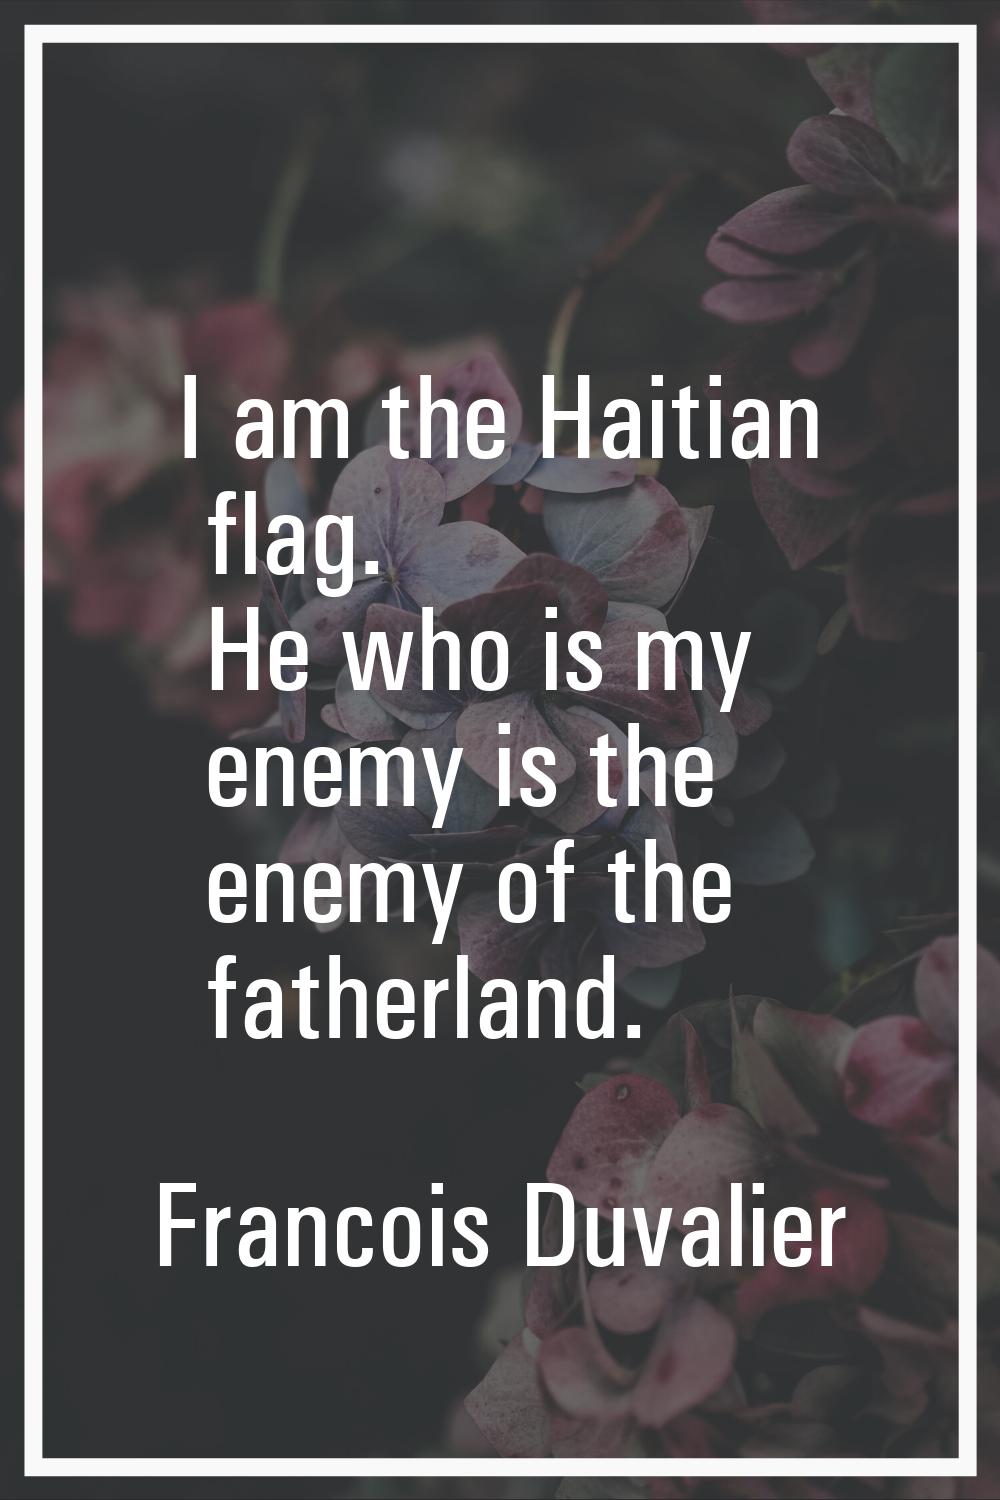 I am the Haitian flag. He who is my enemy is the enemy of the fatherland.